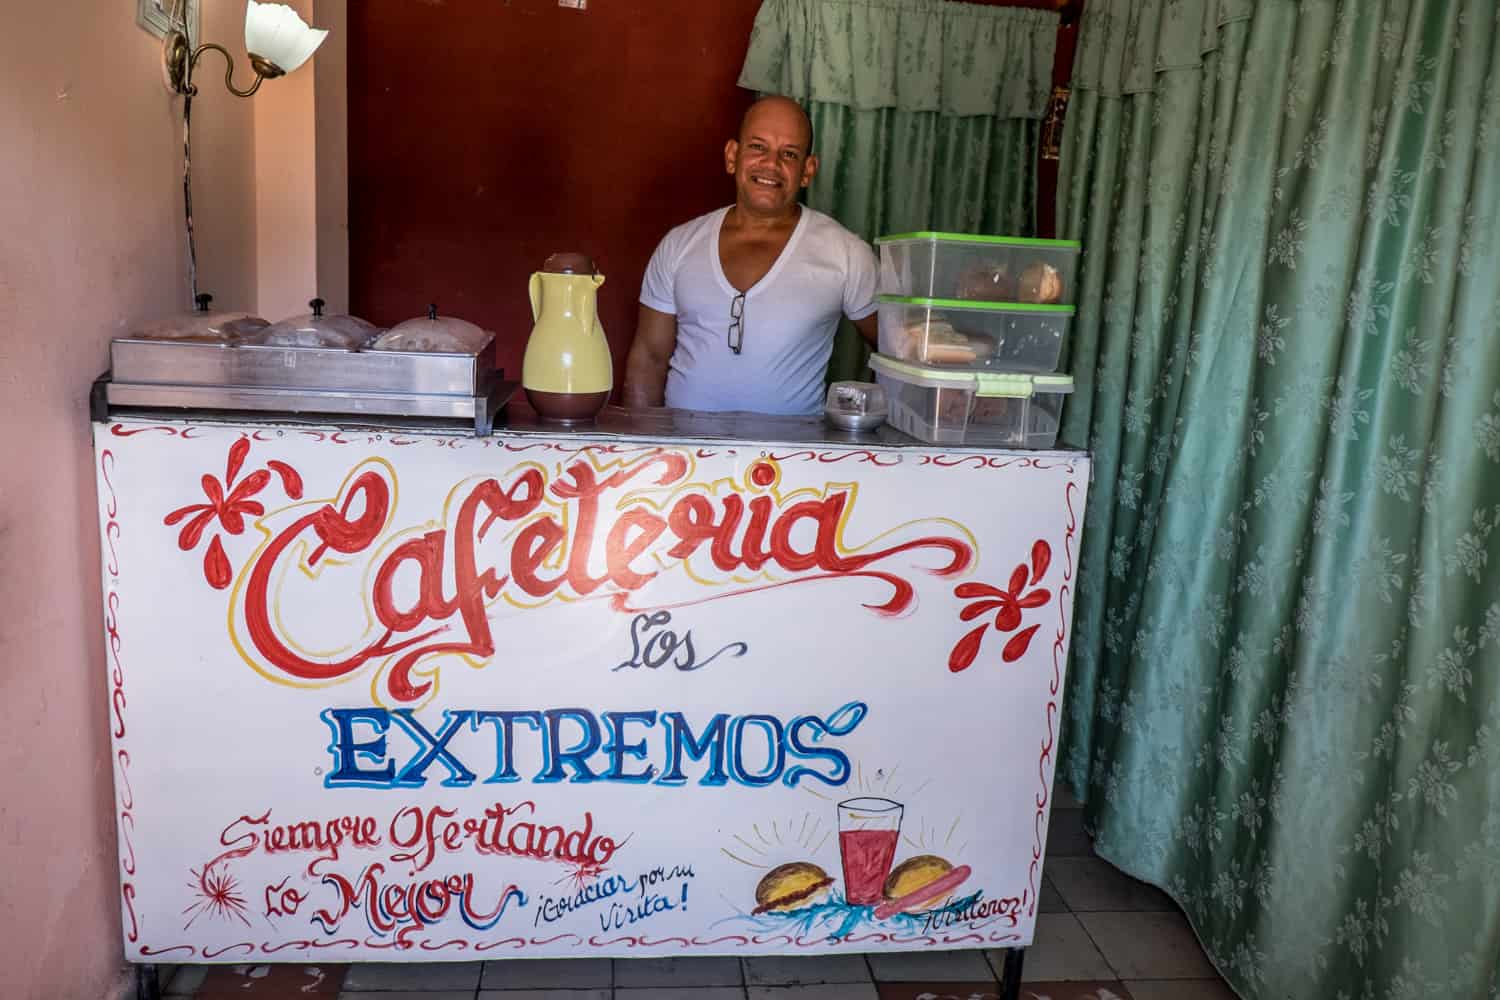 A Cuban man and his Cafeteria set-up in a house. A typical Cuban enterprise. 